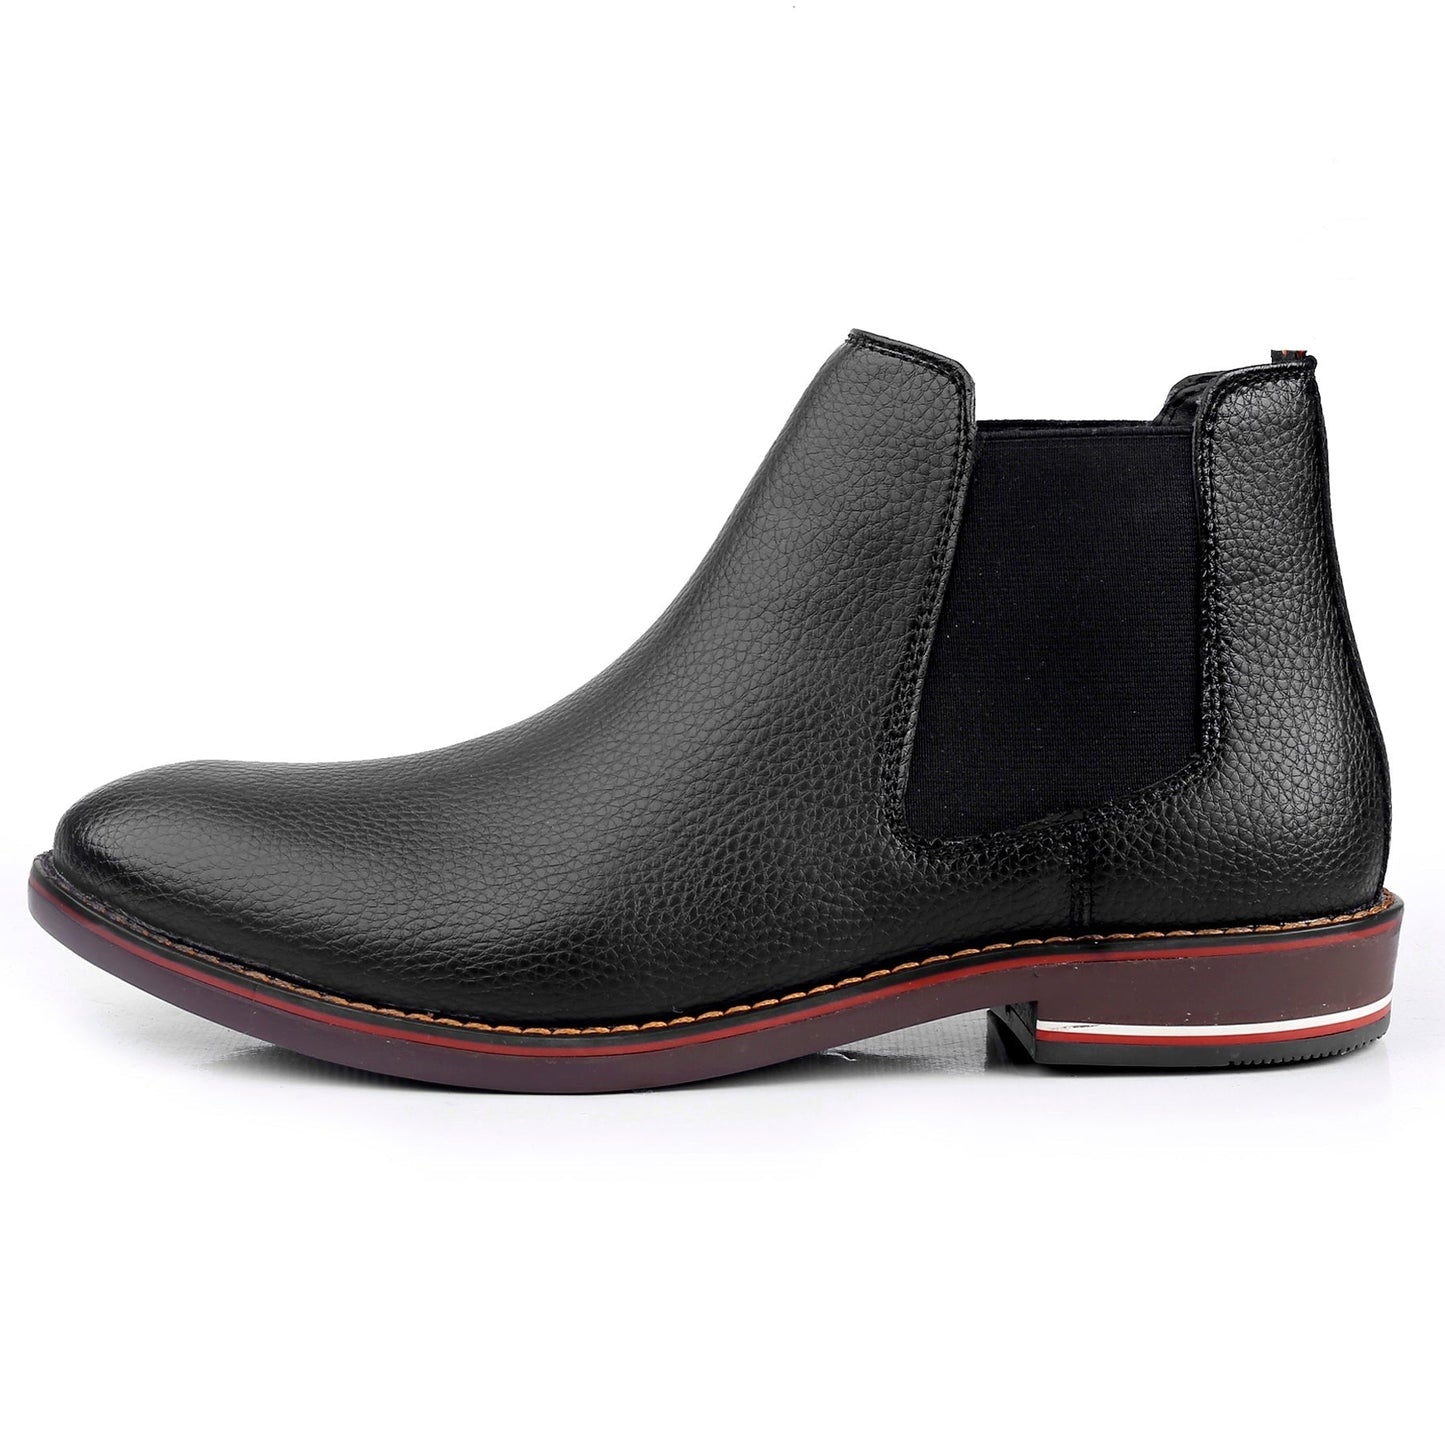 New Chelsea Black Boot For Men Party And Casual Wear -JackMarc